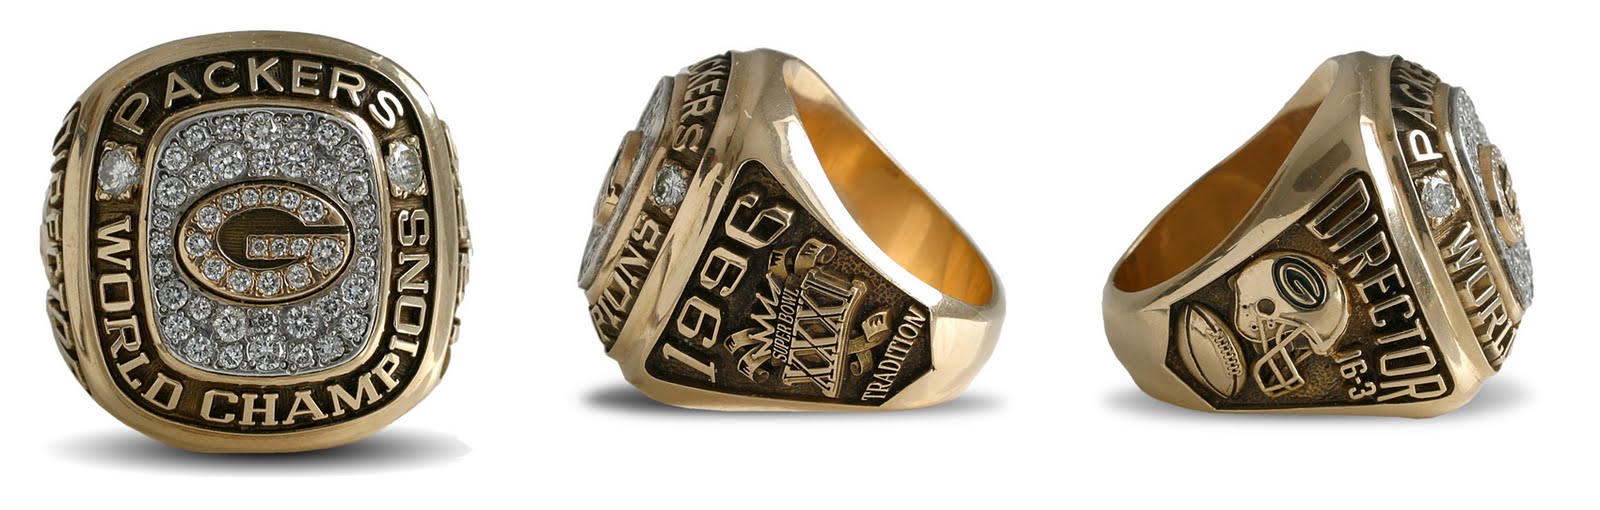 Resistent naaimachine Vermindering Ranking the Most Blinged-Out Championship Rings in Sports | News, Scores,  Highlights, Stats, and Rumors | Bleacher Report